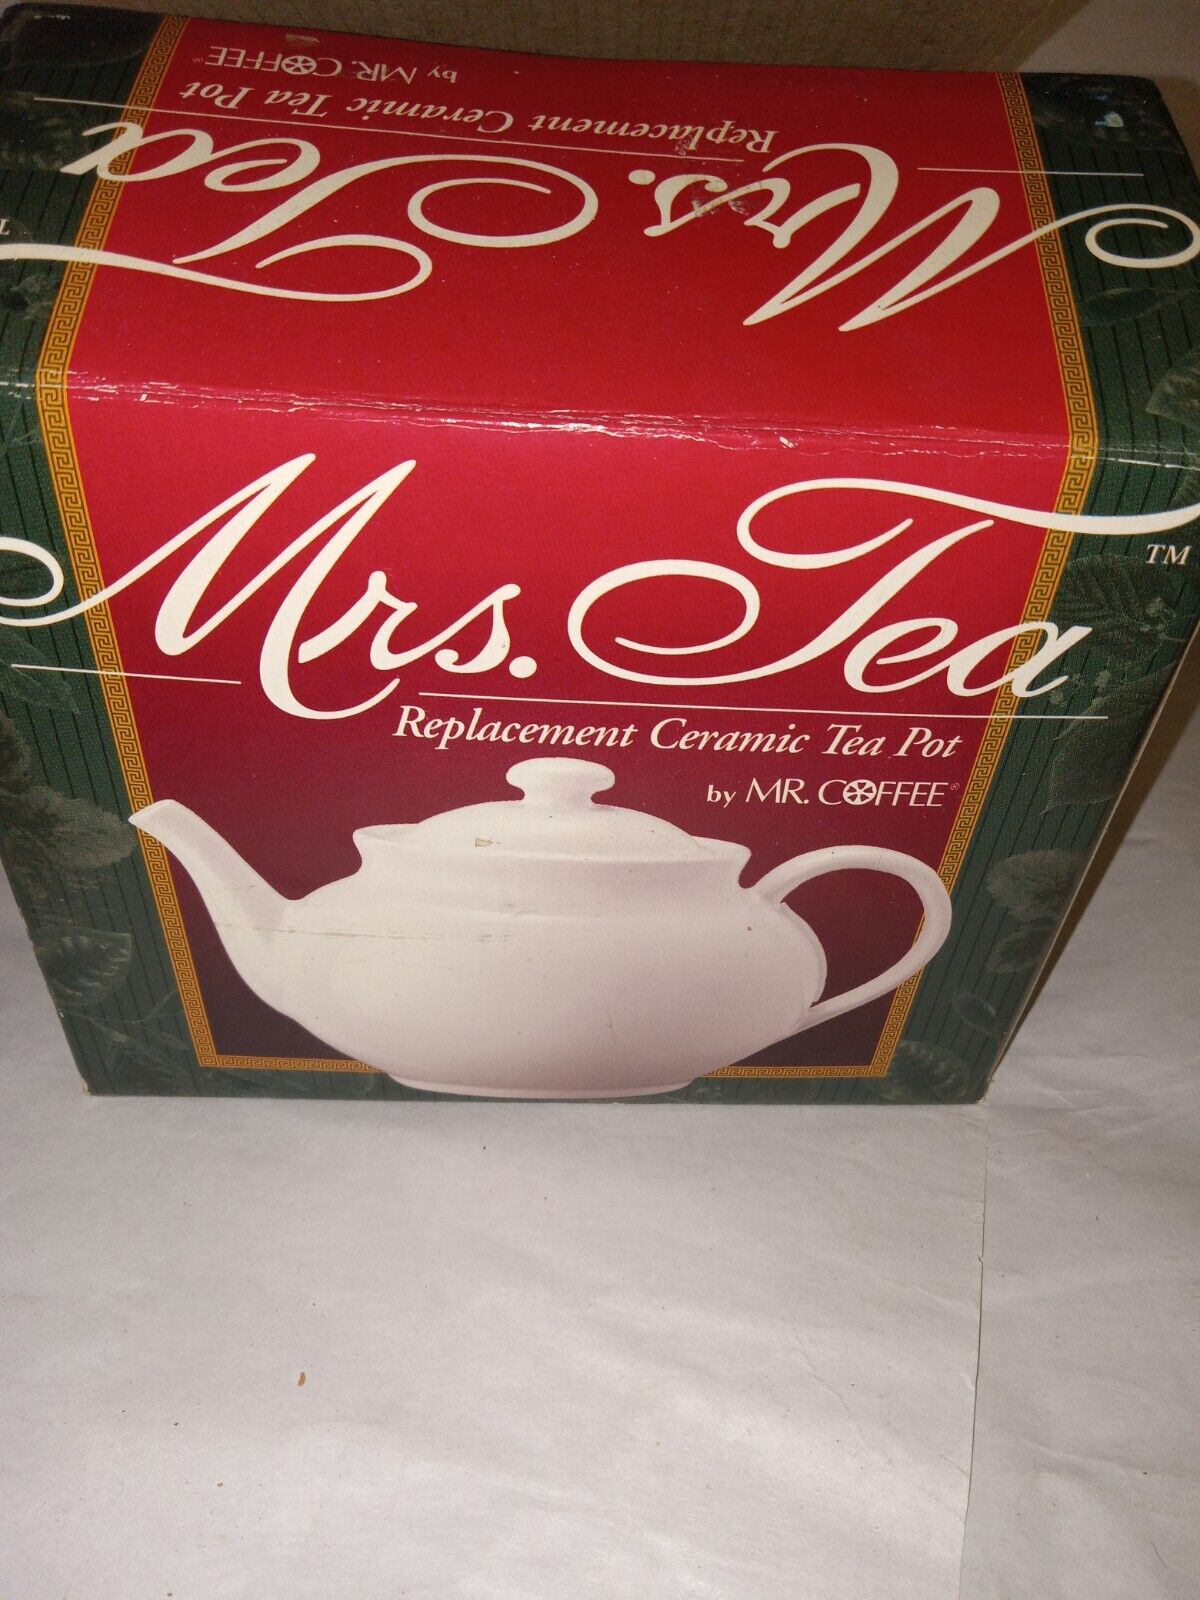 NEW ~ Replacement Tea Pot for MR. COFFEE MRS. TEA Maker ~ 6 CUP ~ CERAMIC ~ Hot